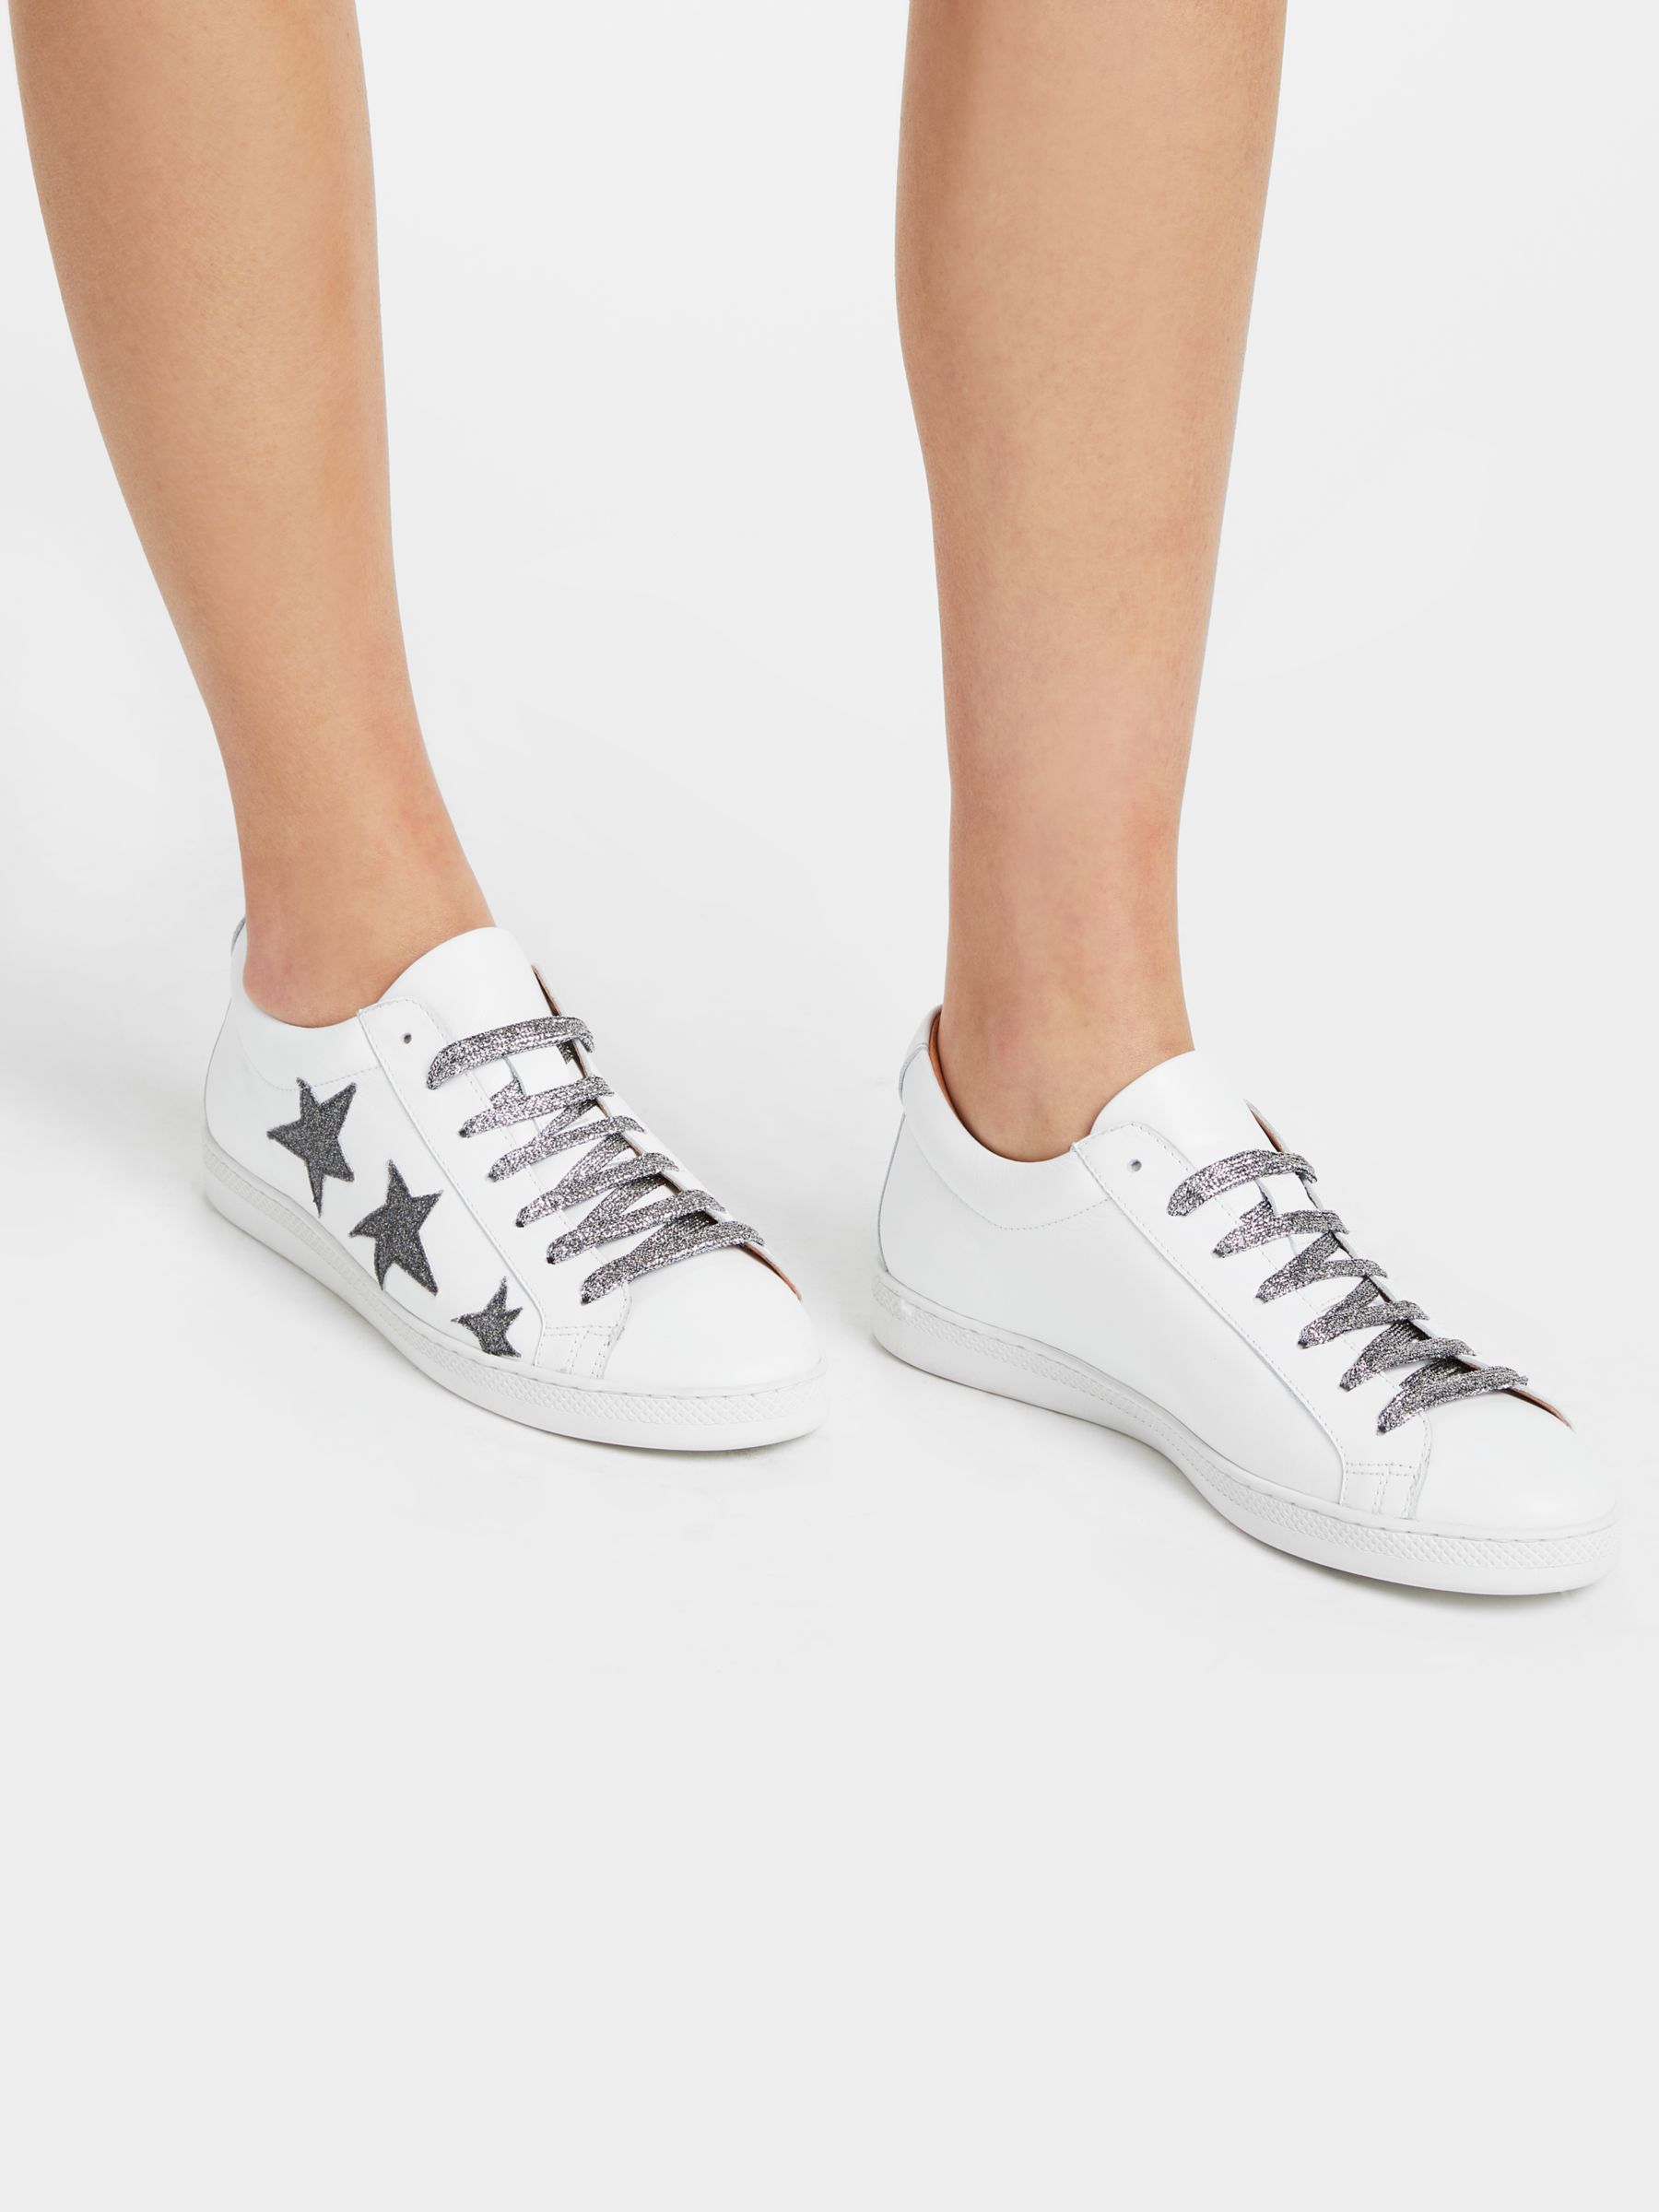 star wit trainers best bcf00 0664e